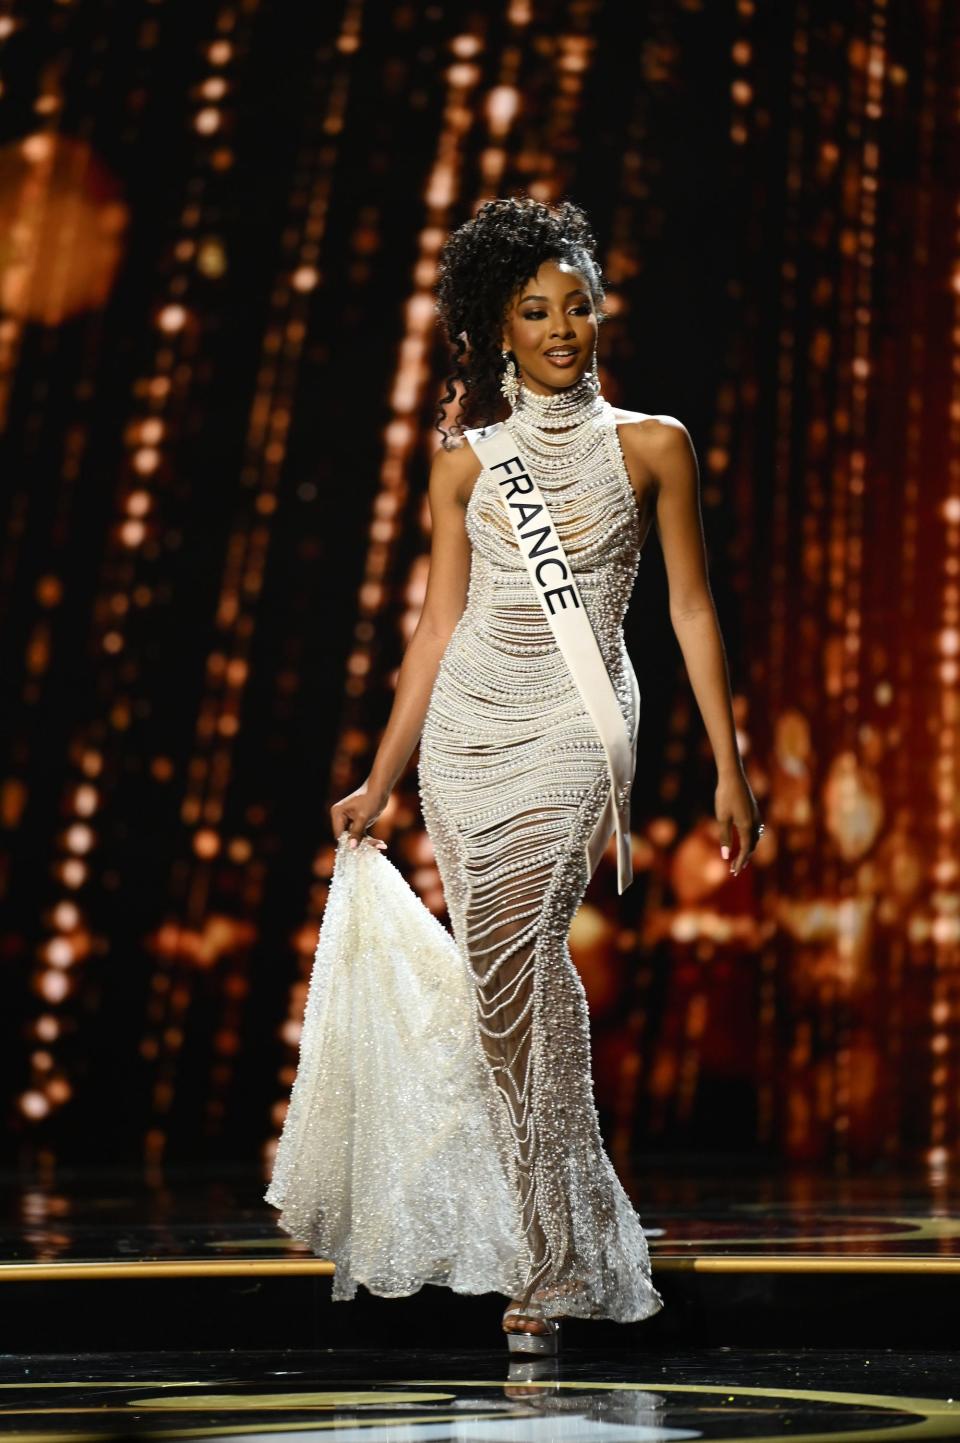 Miss France competes in the 71st annual Miss Universe pageant.